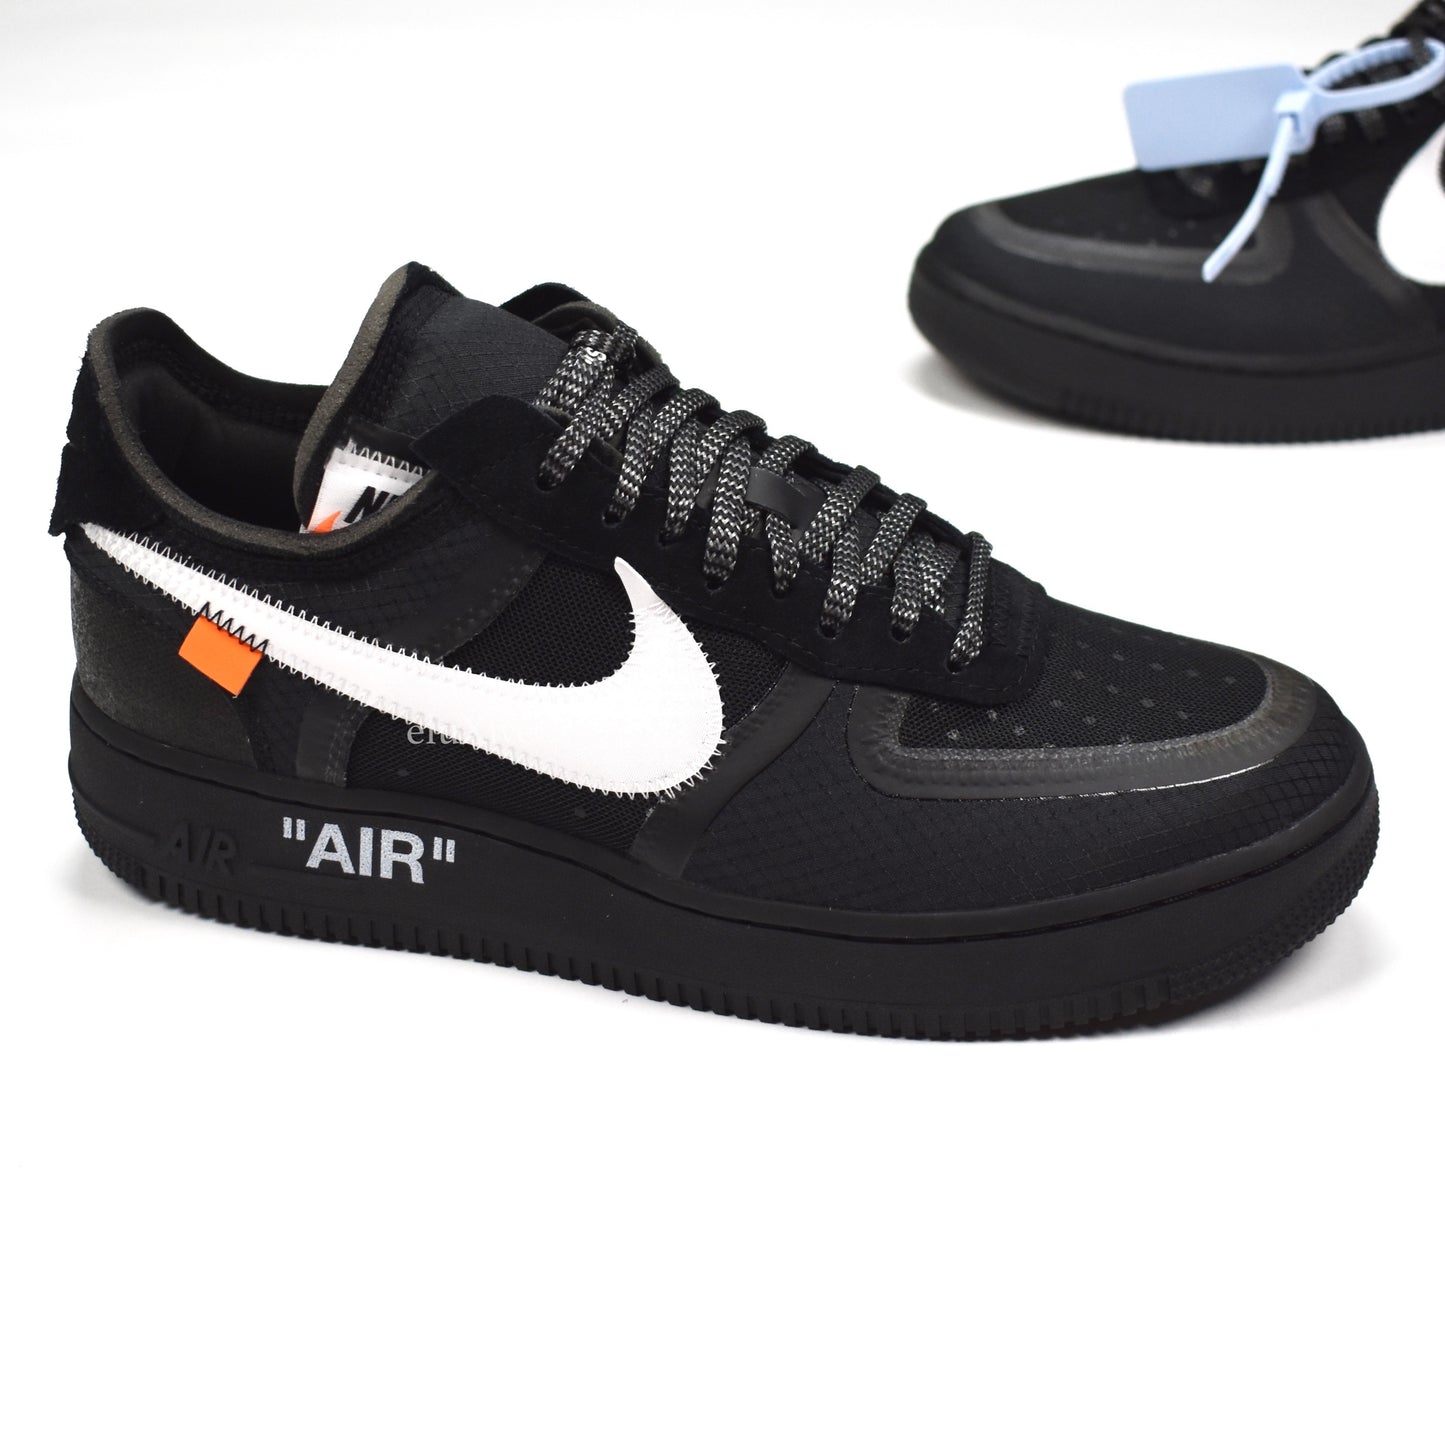 Nike x Off-White - Air Force 1 Low Black